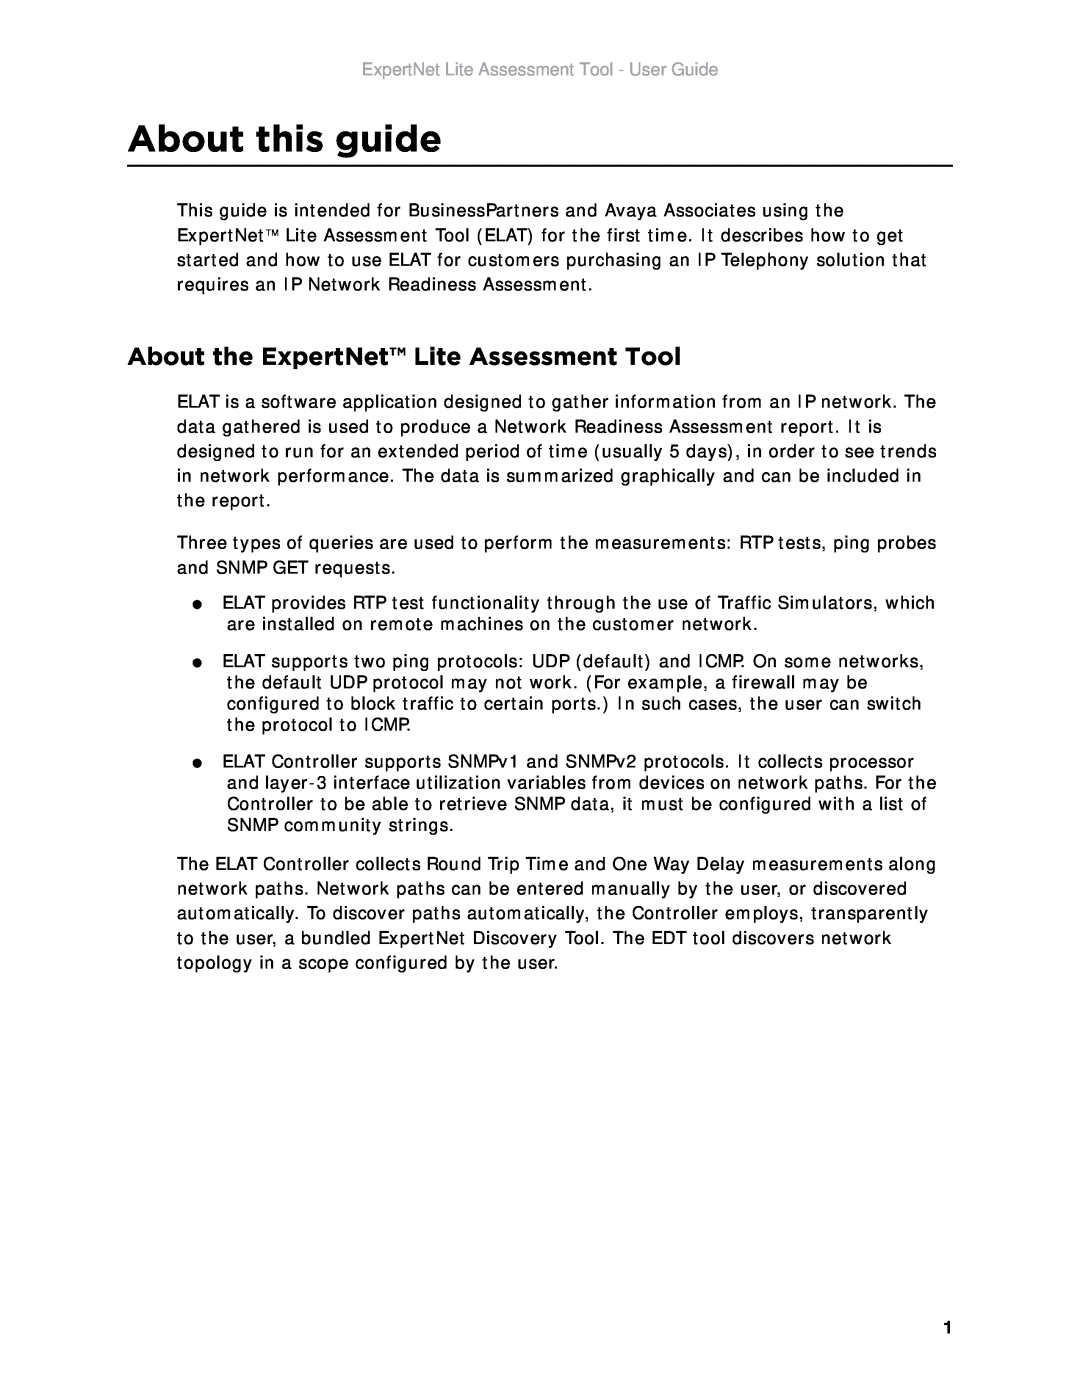 Avaya ELAT manual About this guide, About the ExpertNet Lite Assessment Tool, ExpertNet Lite Assessment Tool - User Guide 